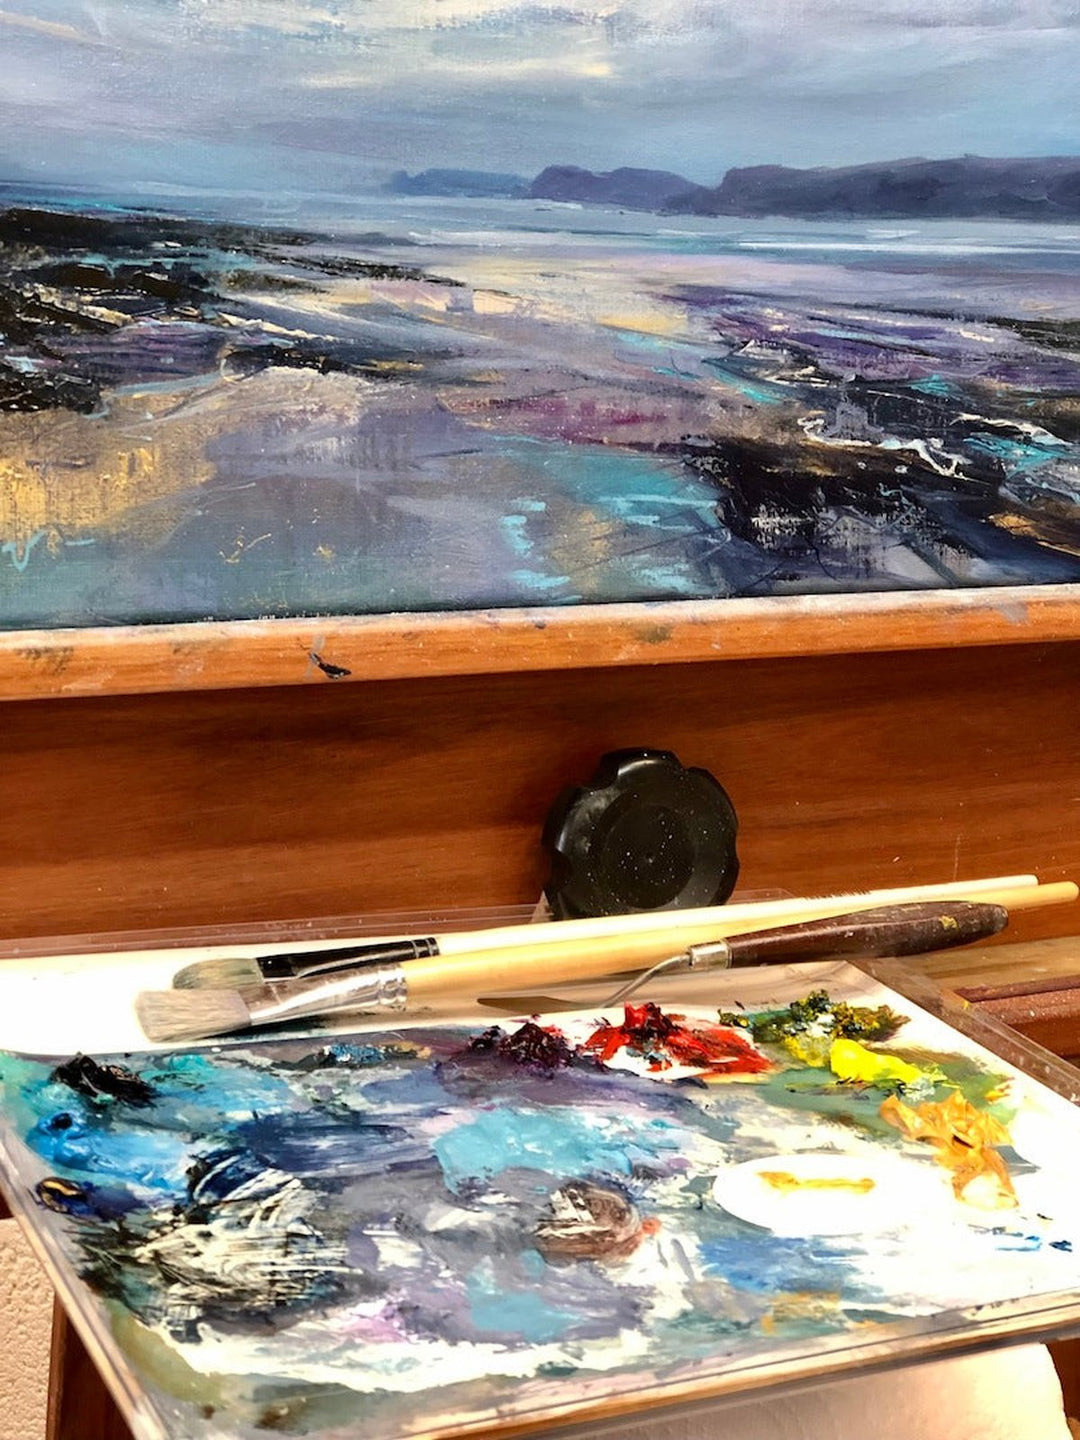 Book a workshop: Get to Grips with Oils 11th – 14th August 2022